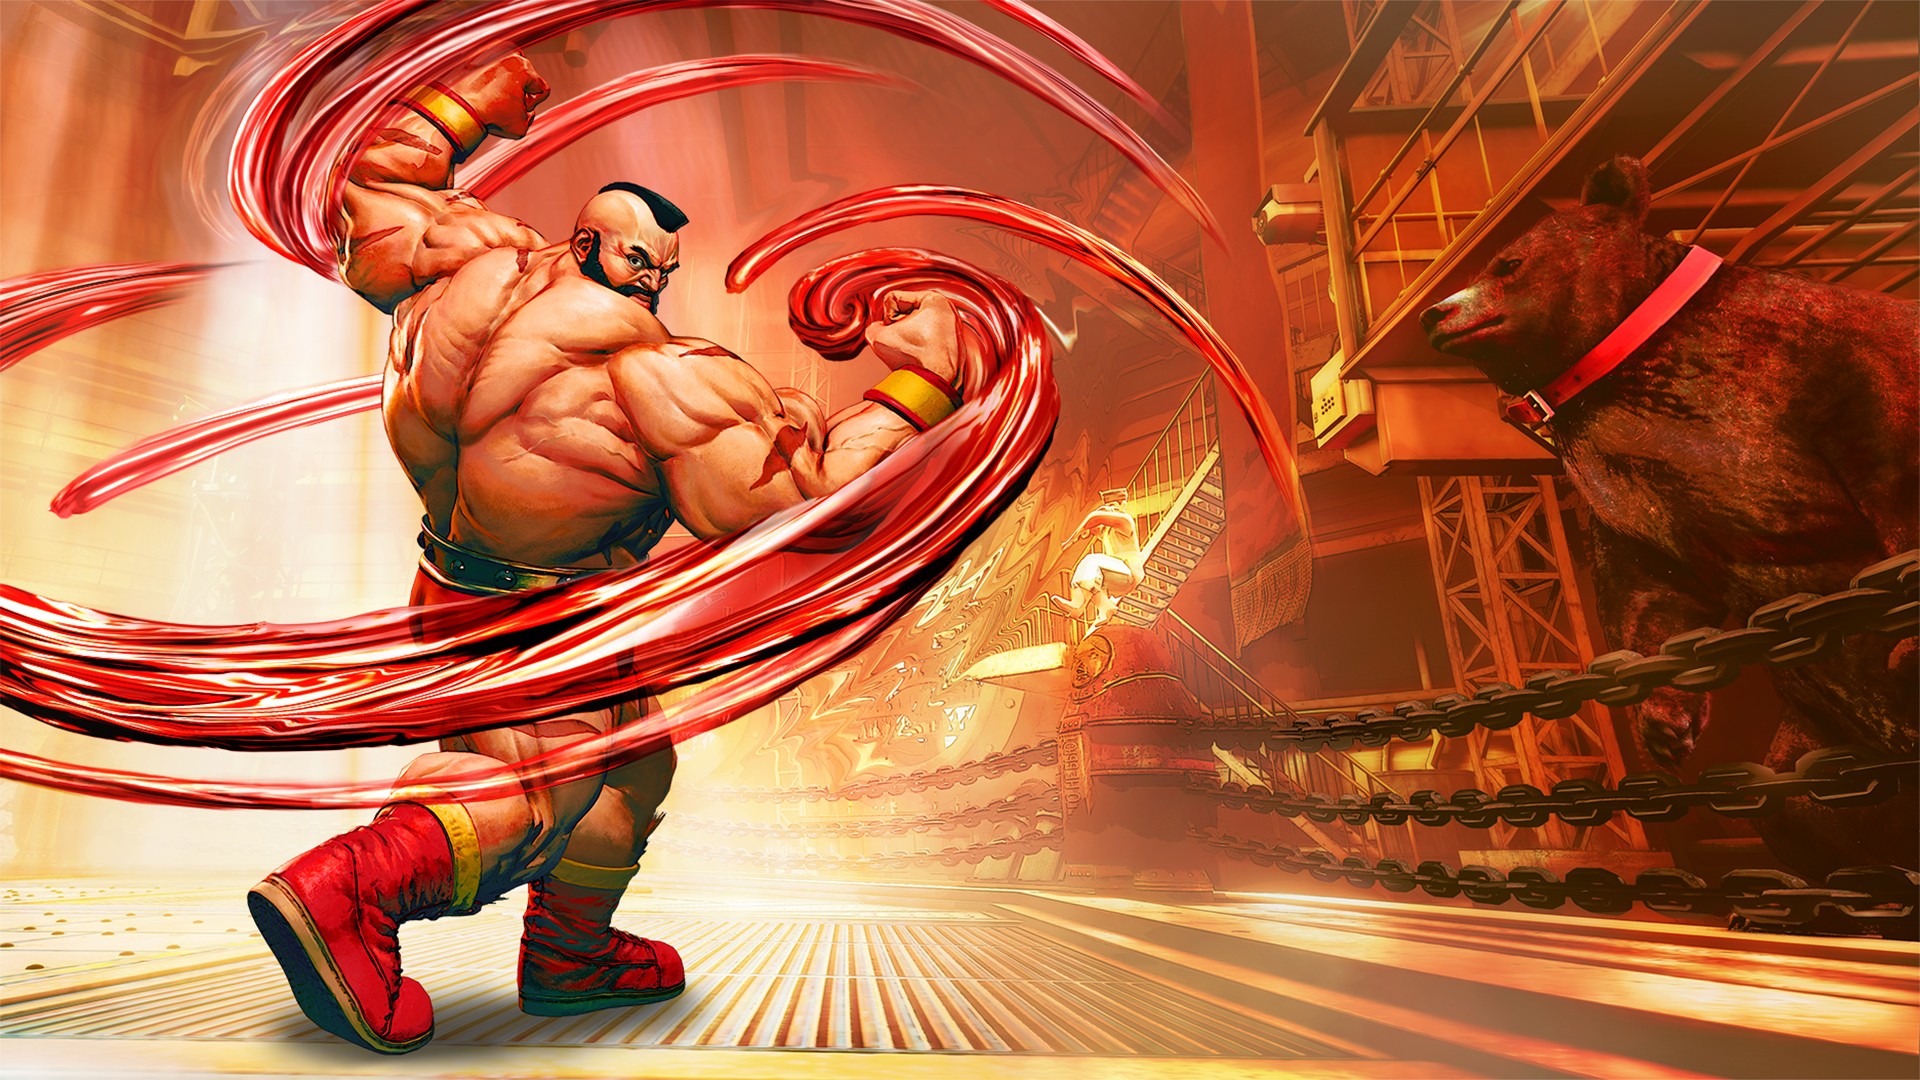 General 1920x1080 red video game warriors Street Fighter video games video game men video game art Capcom Zangief (Street Fighter) muscles